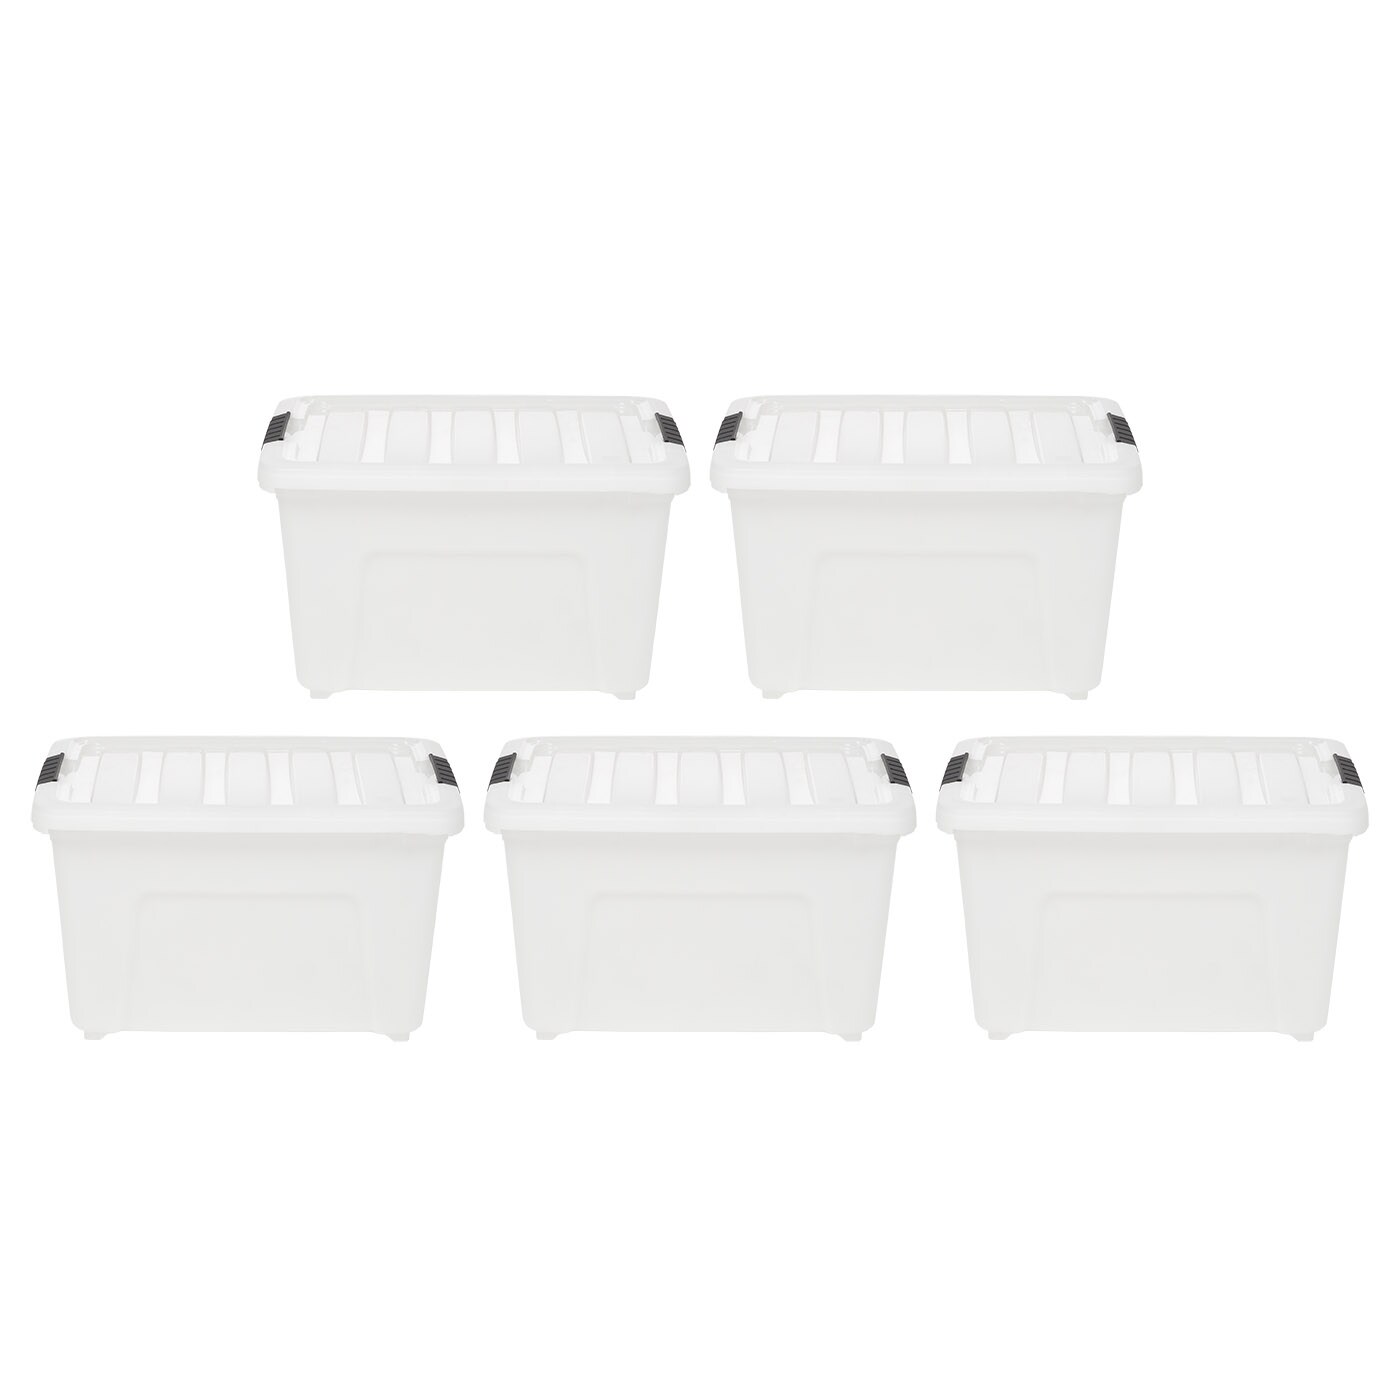 Iris USA 12 Quart Stackable Plastic Storage Bins with Lids and Latching Buckles, 4 Pack - Pearl, Containers with Lids and Latches, Durable Nestable